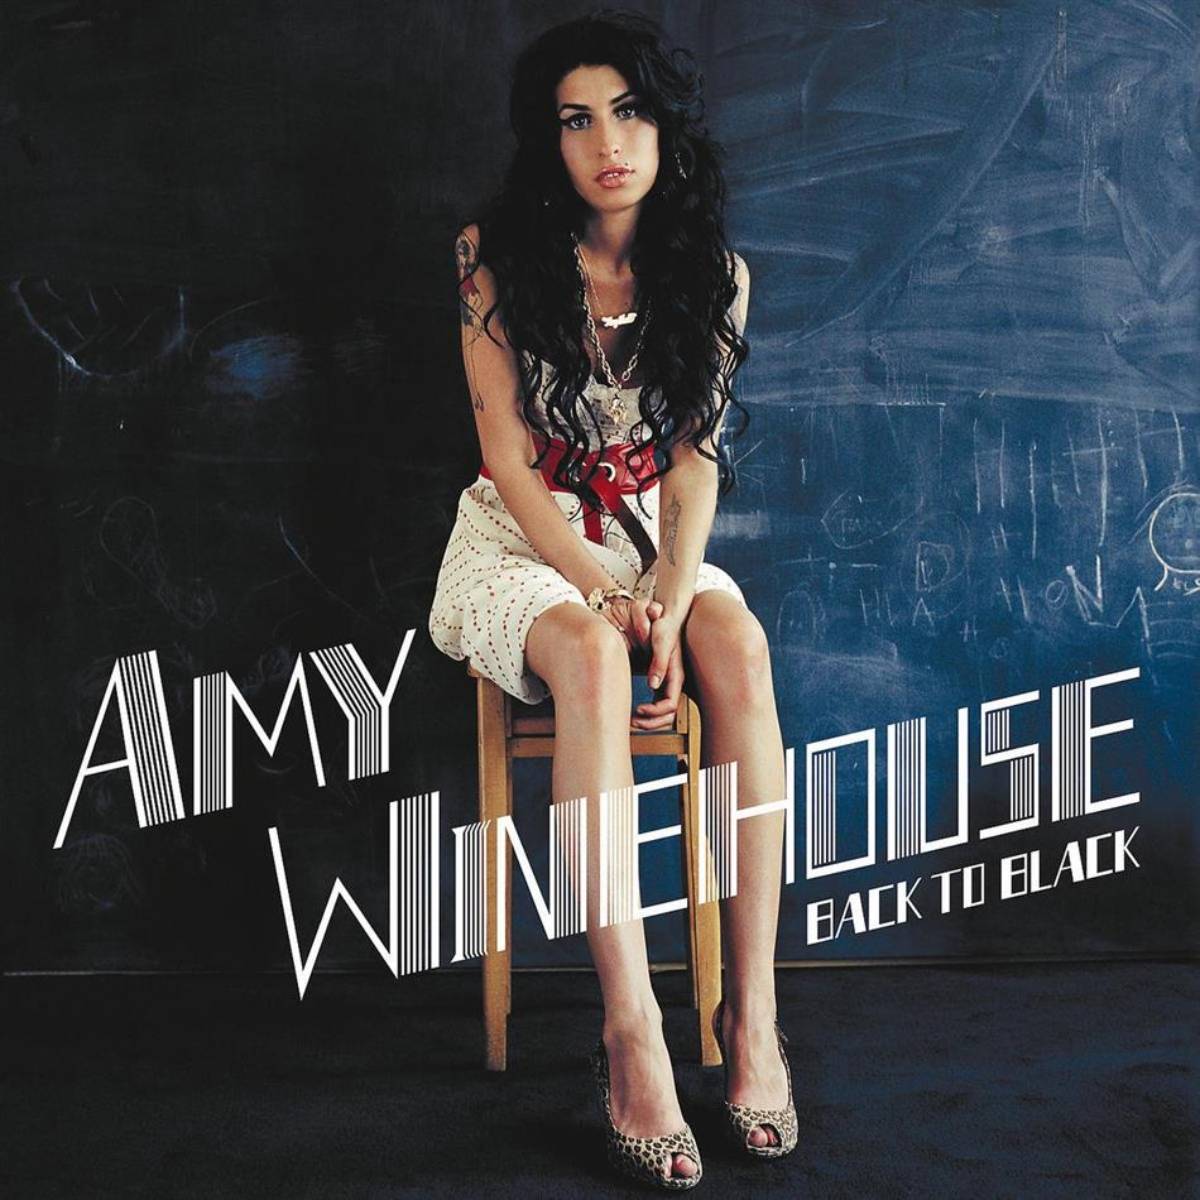 Back To Black was the second and, sadly, last album by the delightful Amy Winehouse.